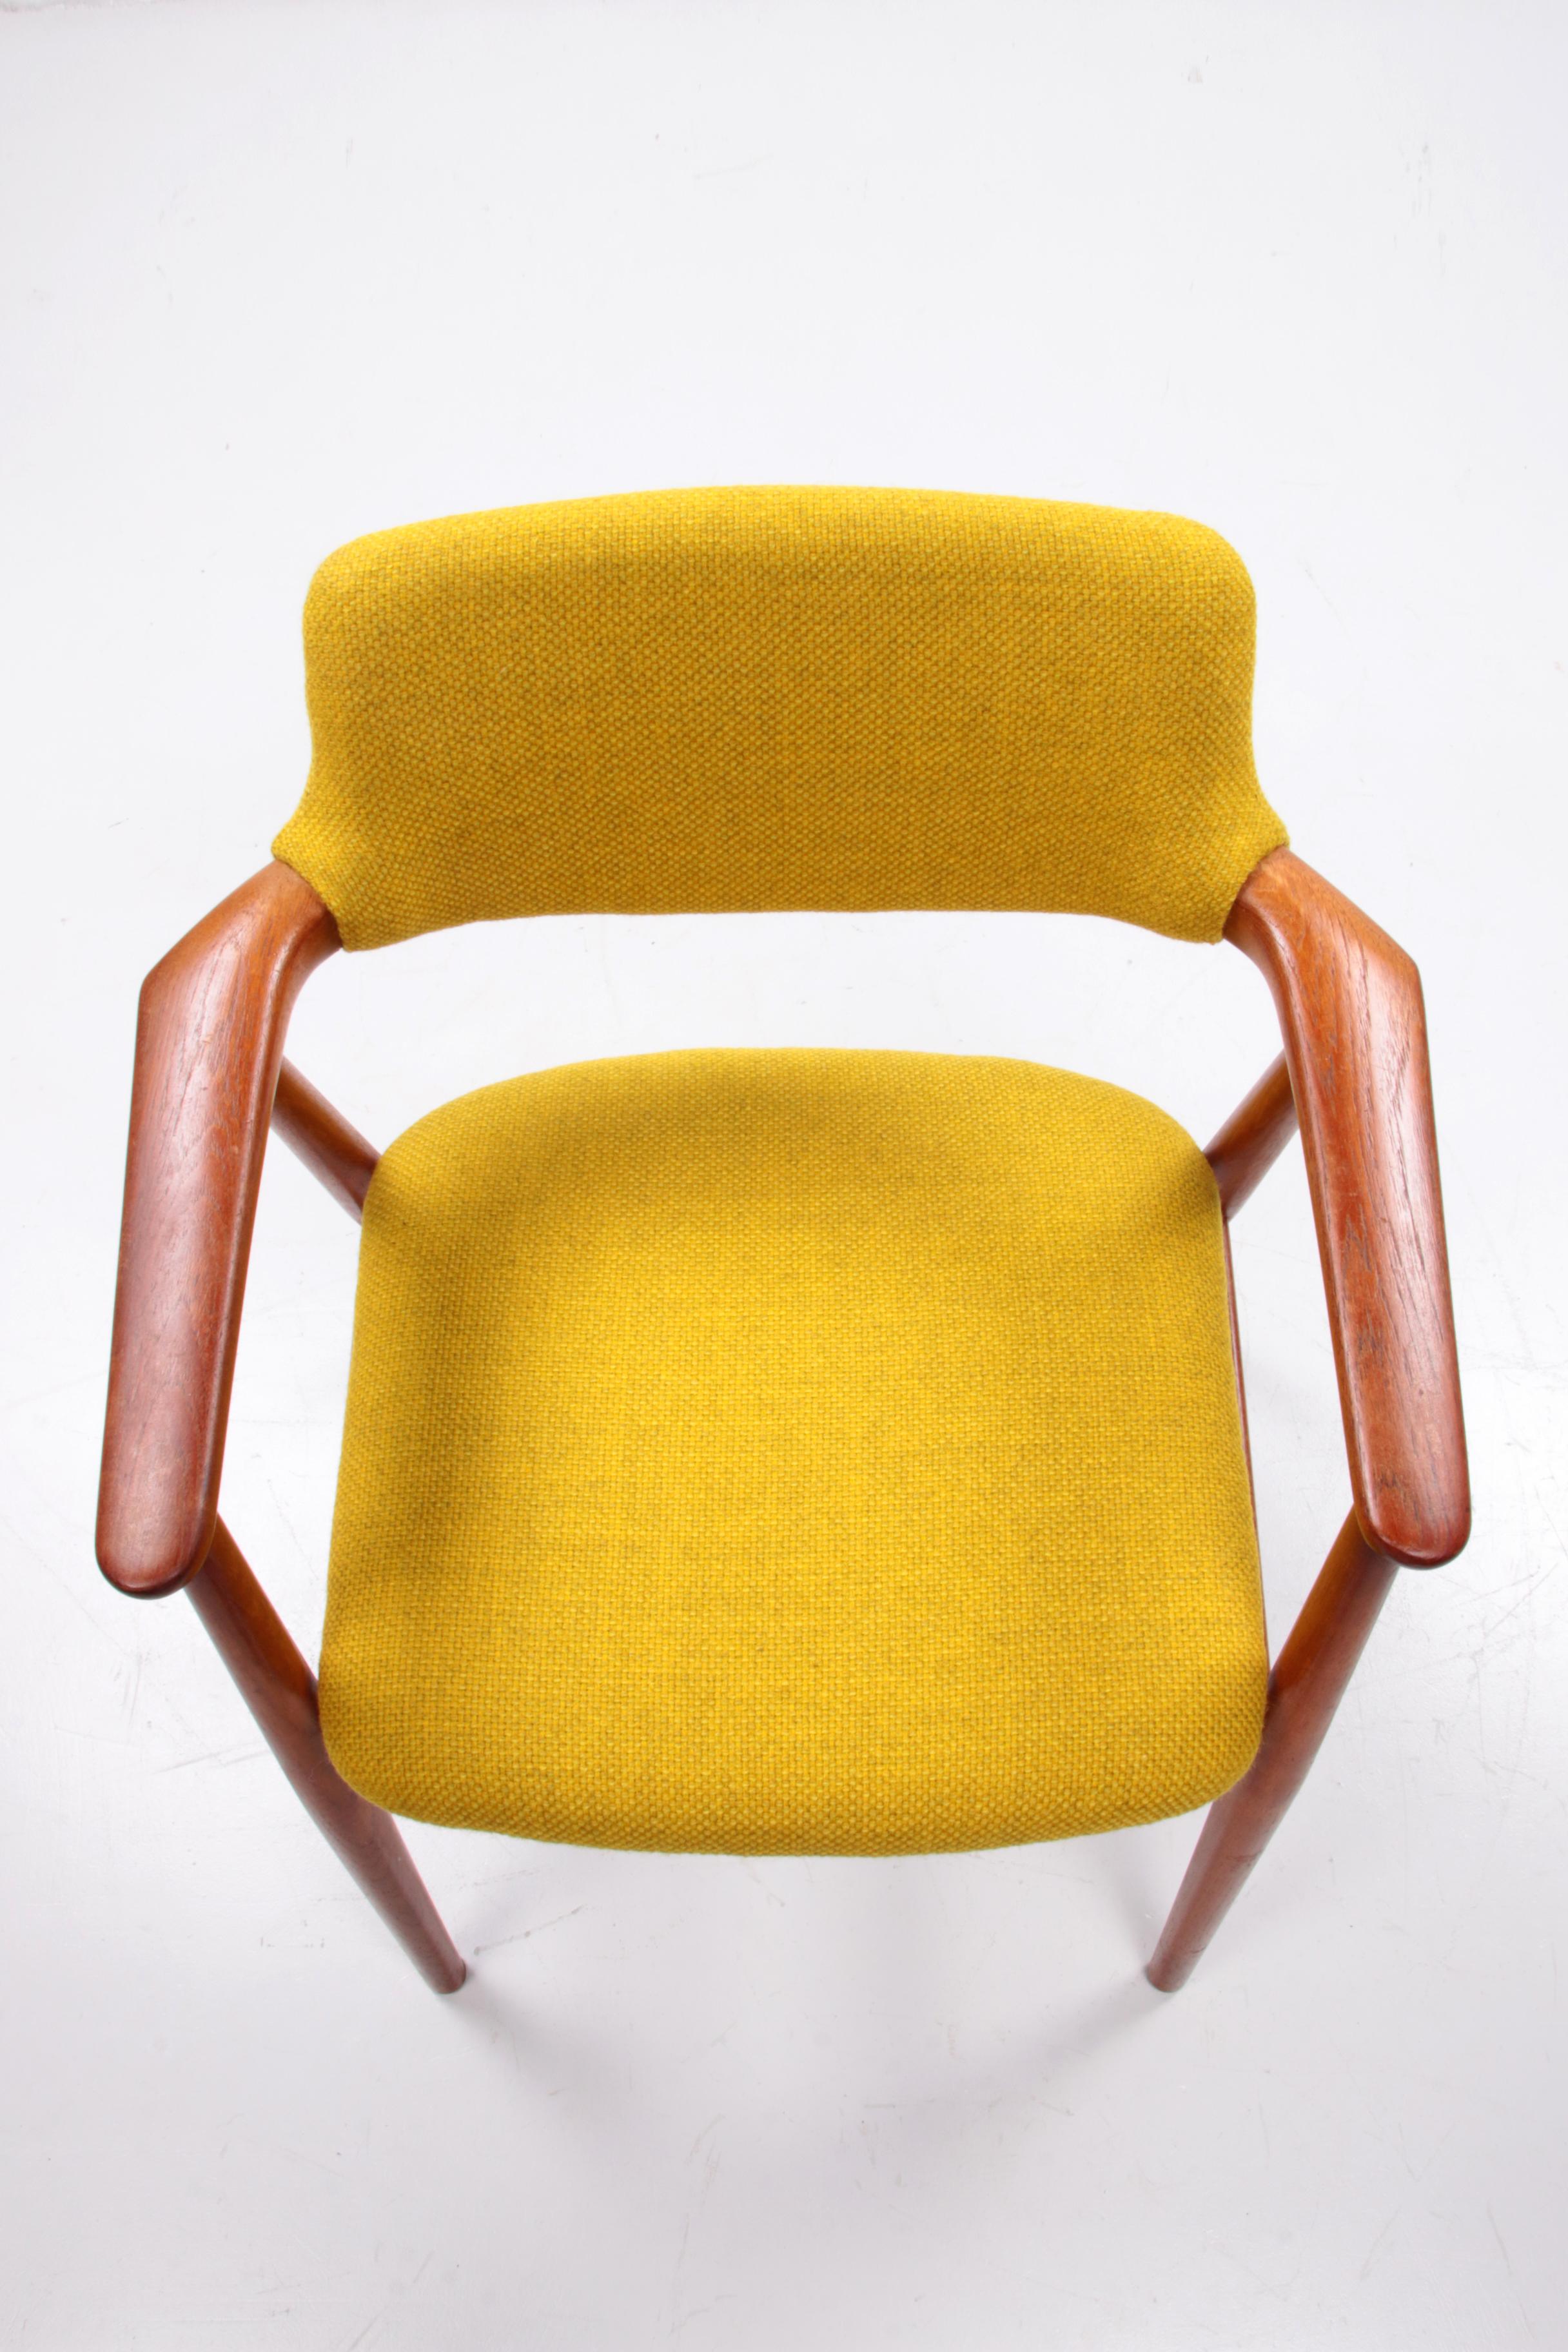 Danish Dining Room Chair by Svend Age Eriksen Model Gm11, 1960s 1